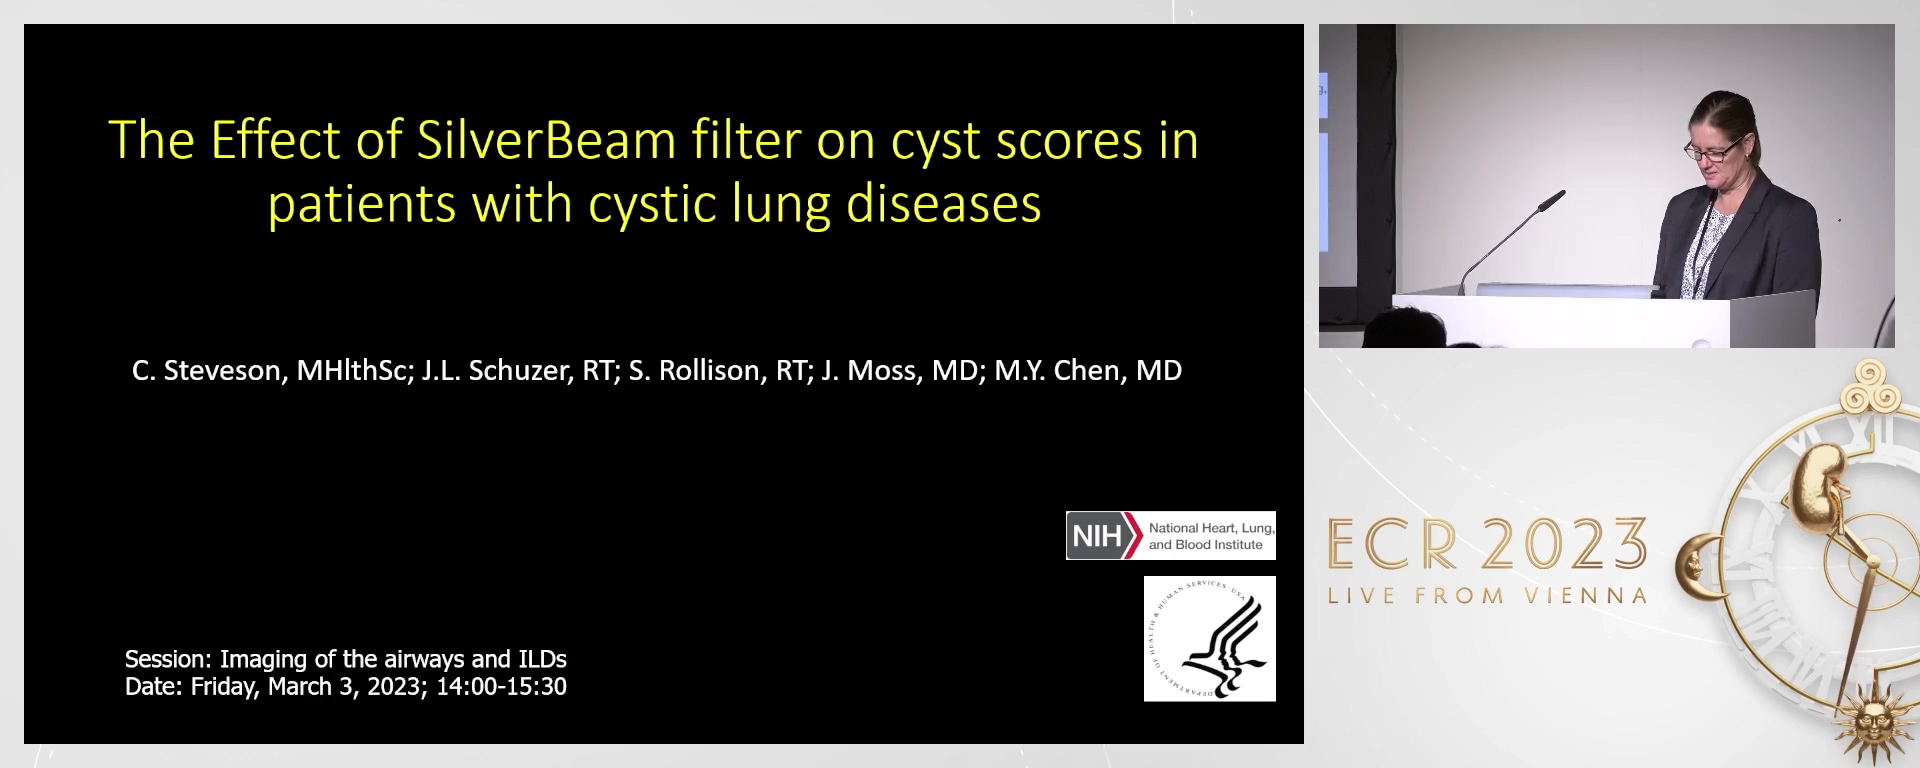 The effect of SilverBeam filter on cyst scores in patients with cystic lung diseases - Chloe Steveson, Adelaide / AU